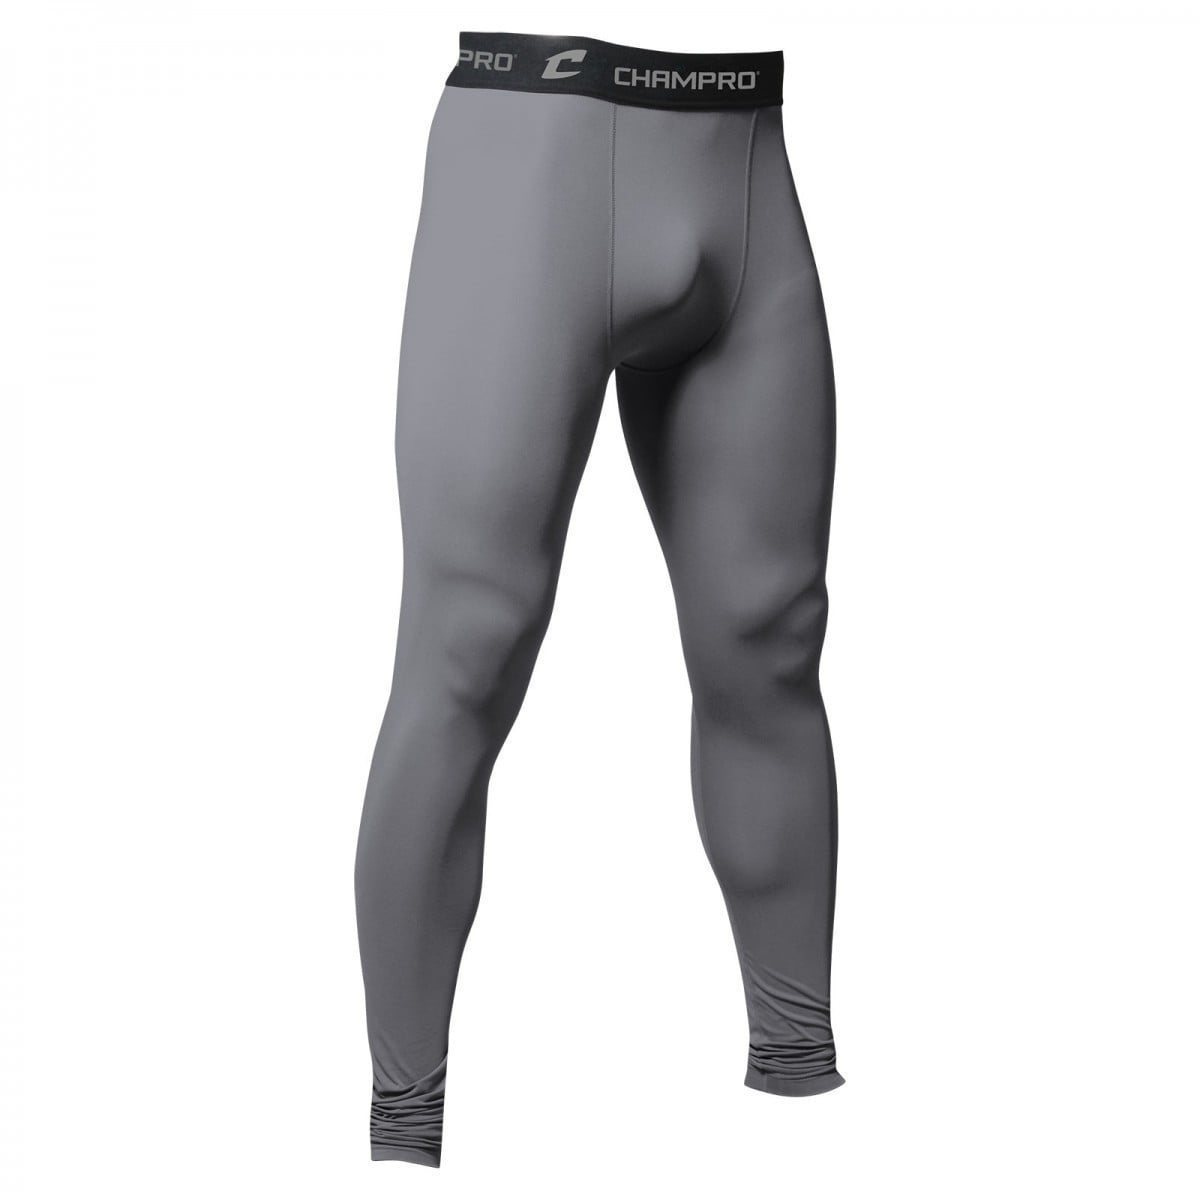 Black Cliff Keen The Force Compression Gear Wrestling Tights 